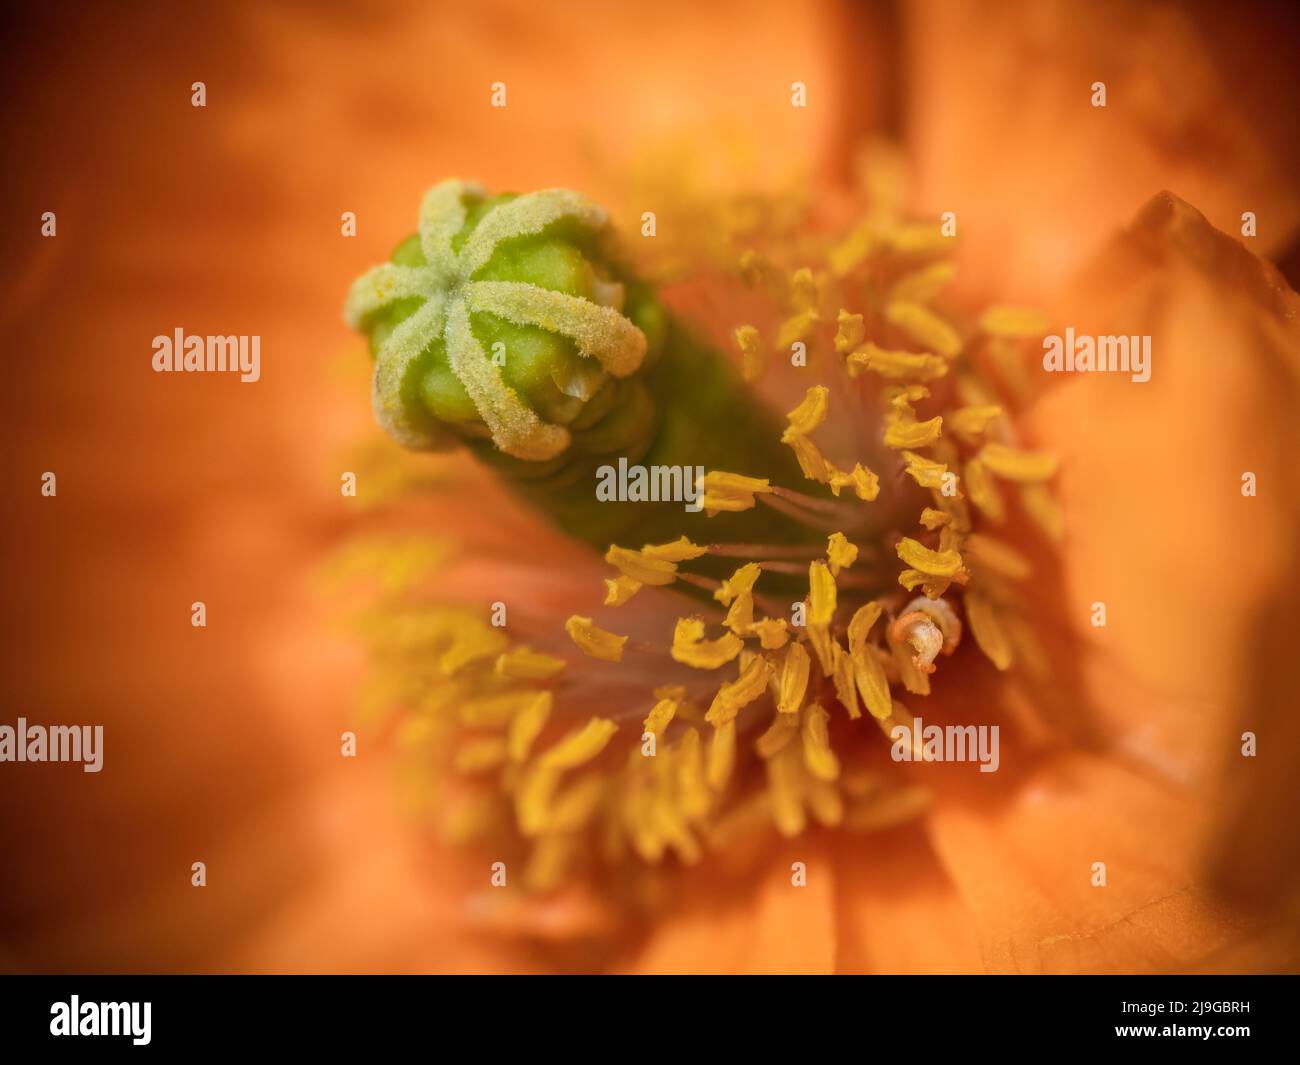 Orange field poppy close-up. Seedpod and stamens, almost abstract. Stock Photo